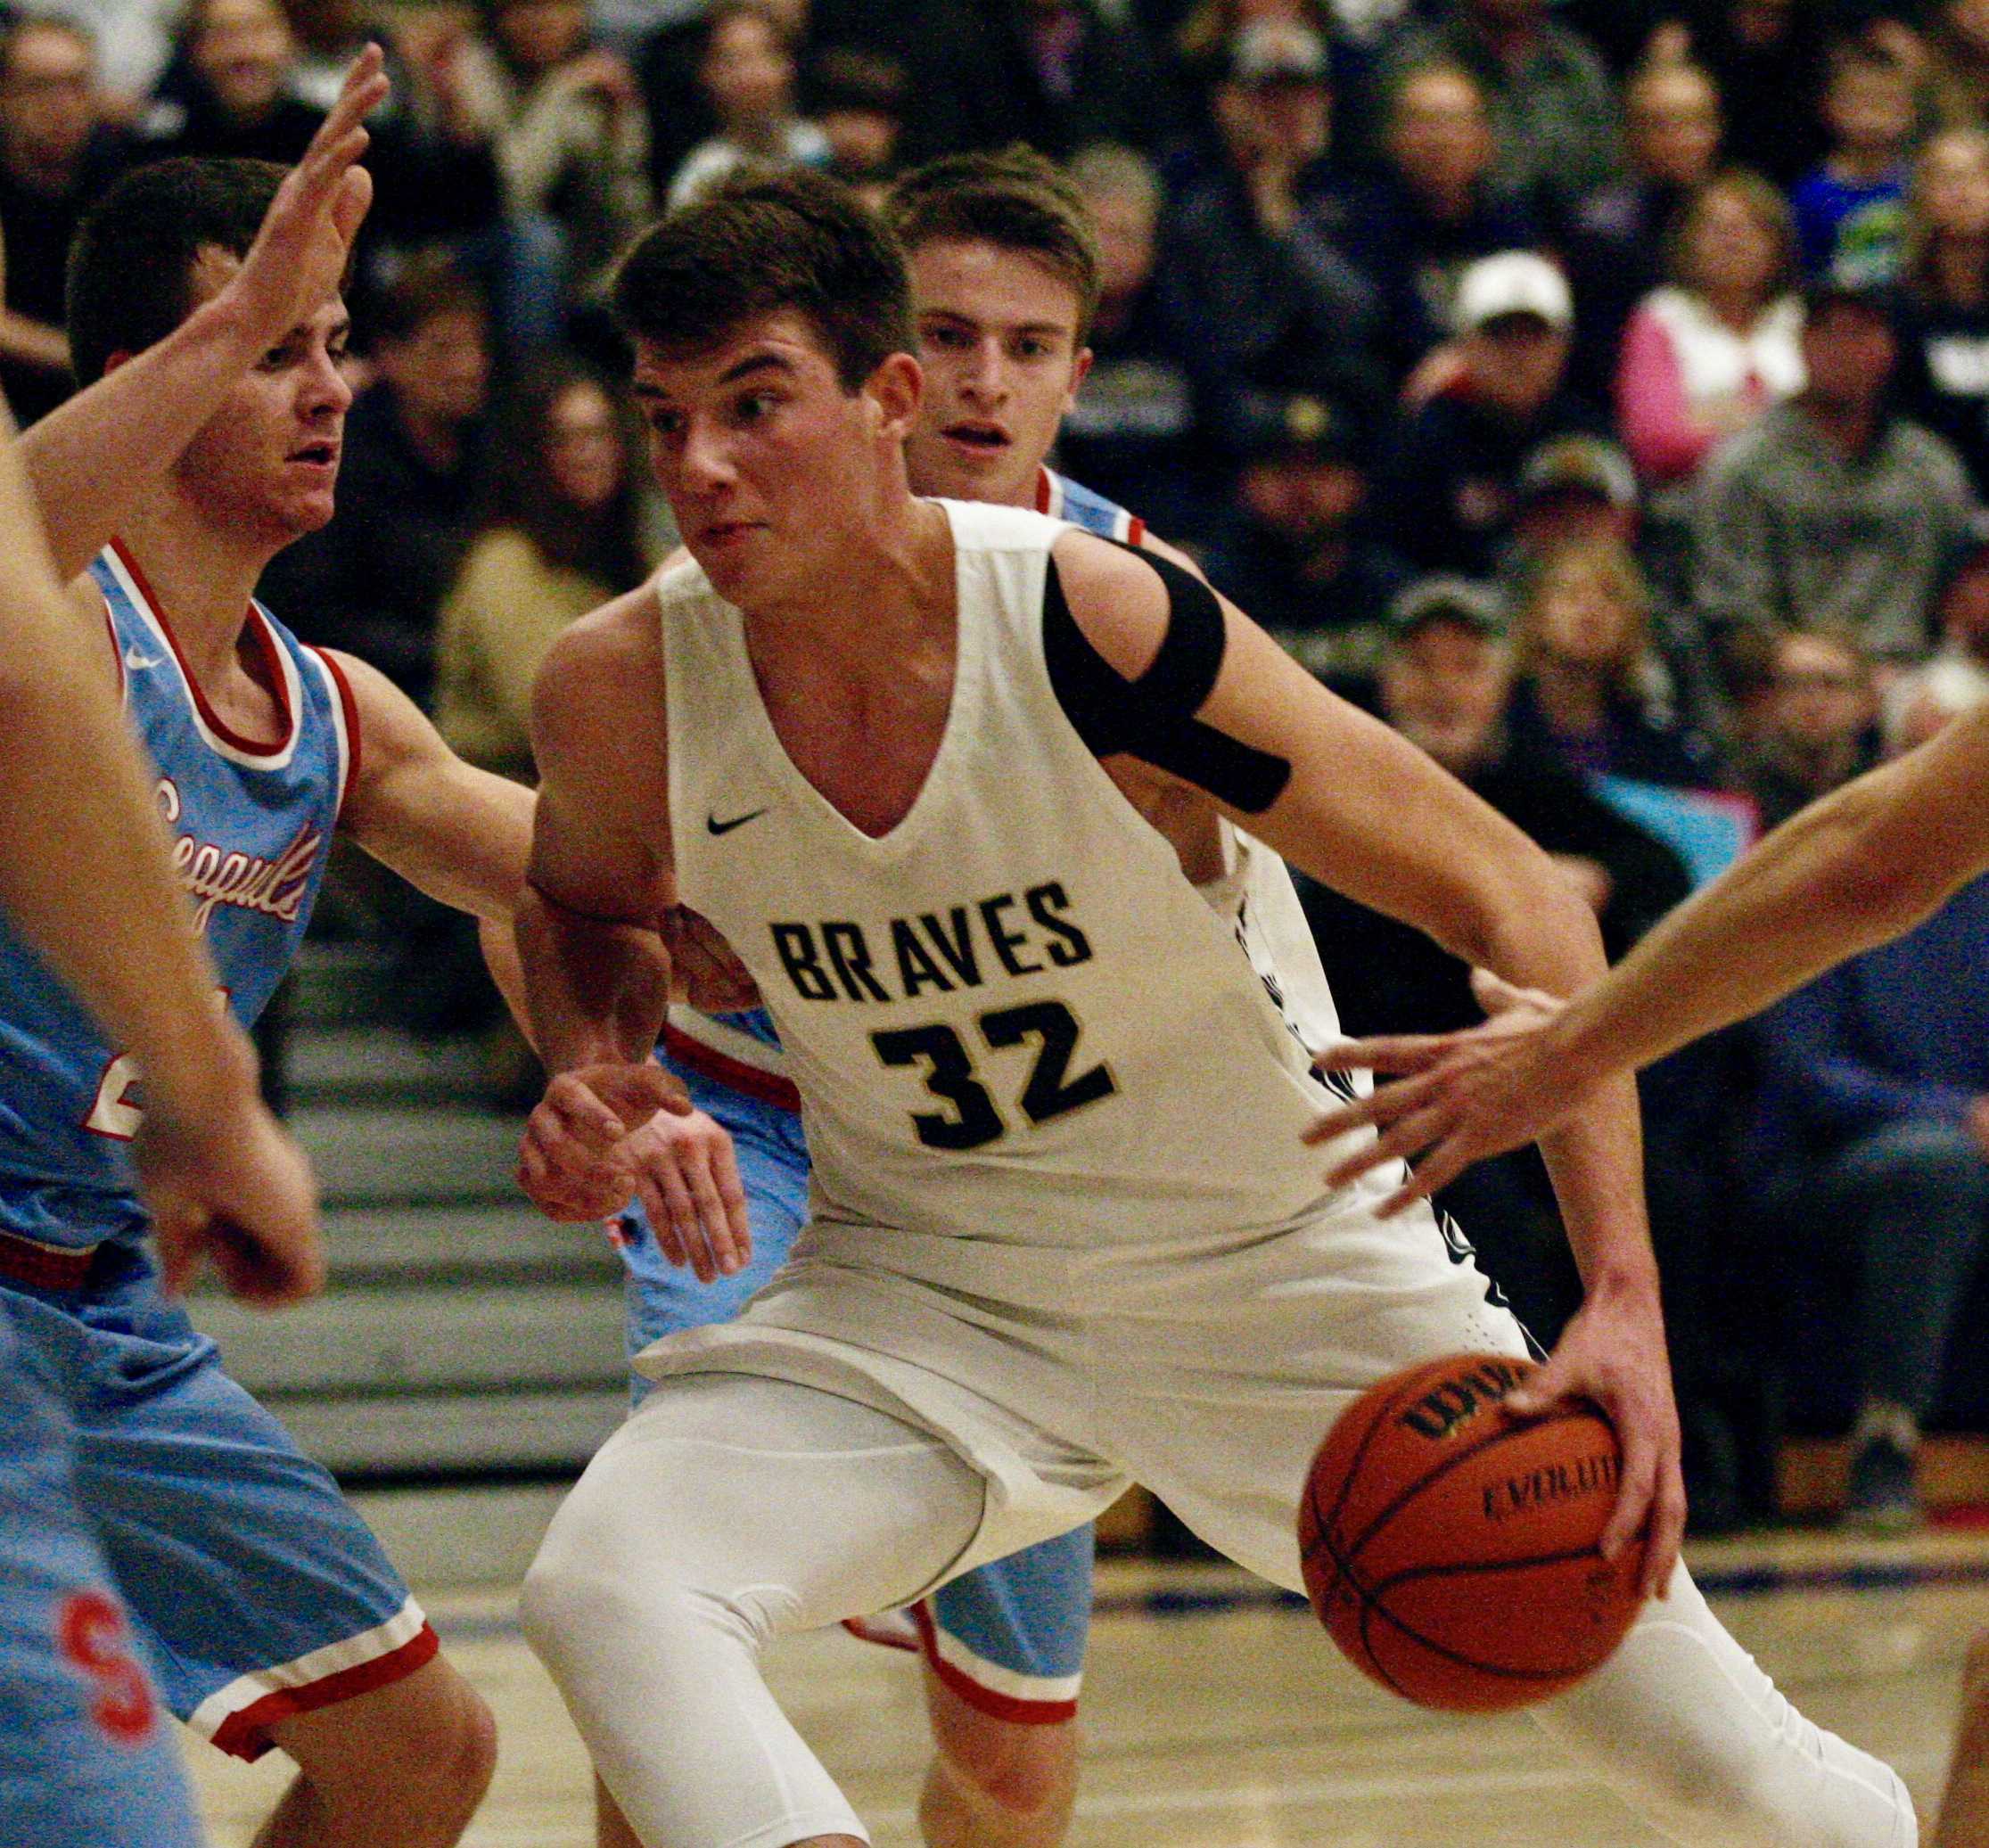 Banks senior Blake Gobel drives into Seaside's Duncan Thompson for two of his game and career-high 21 points in Braves' win.